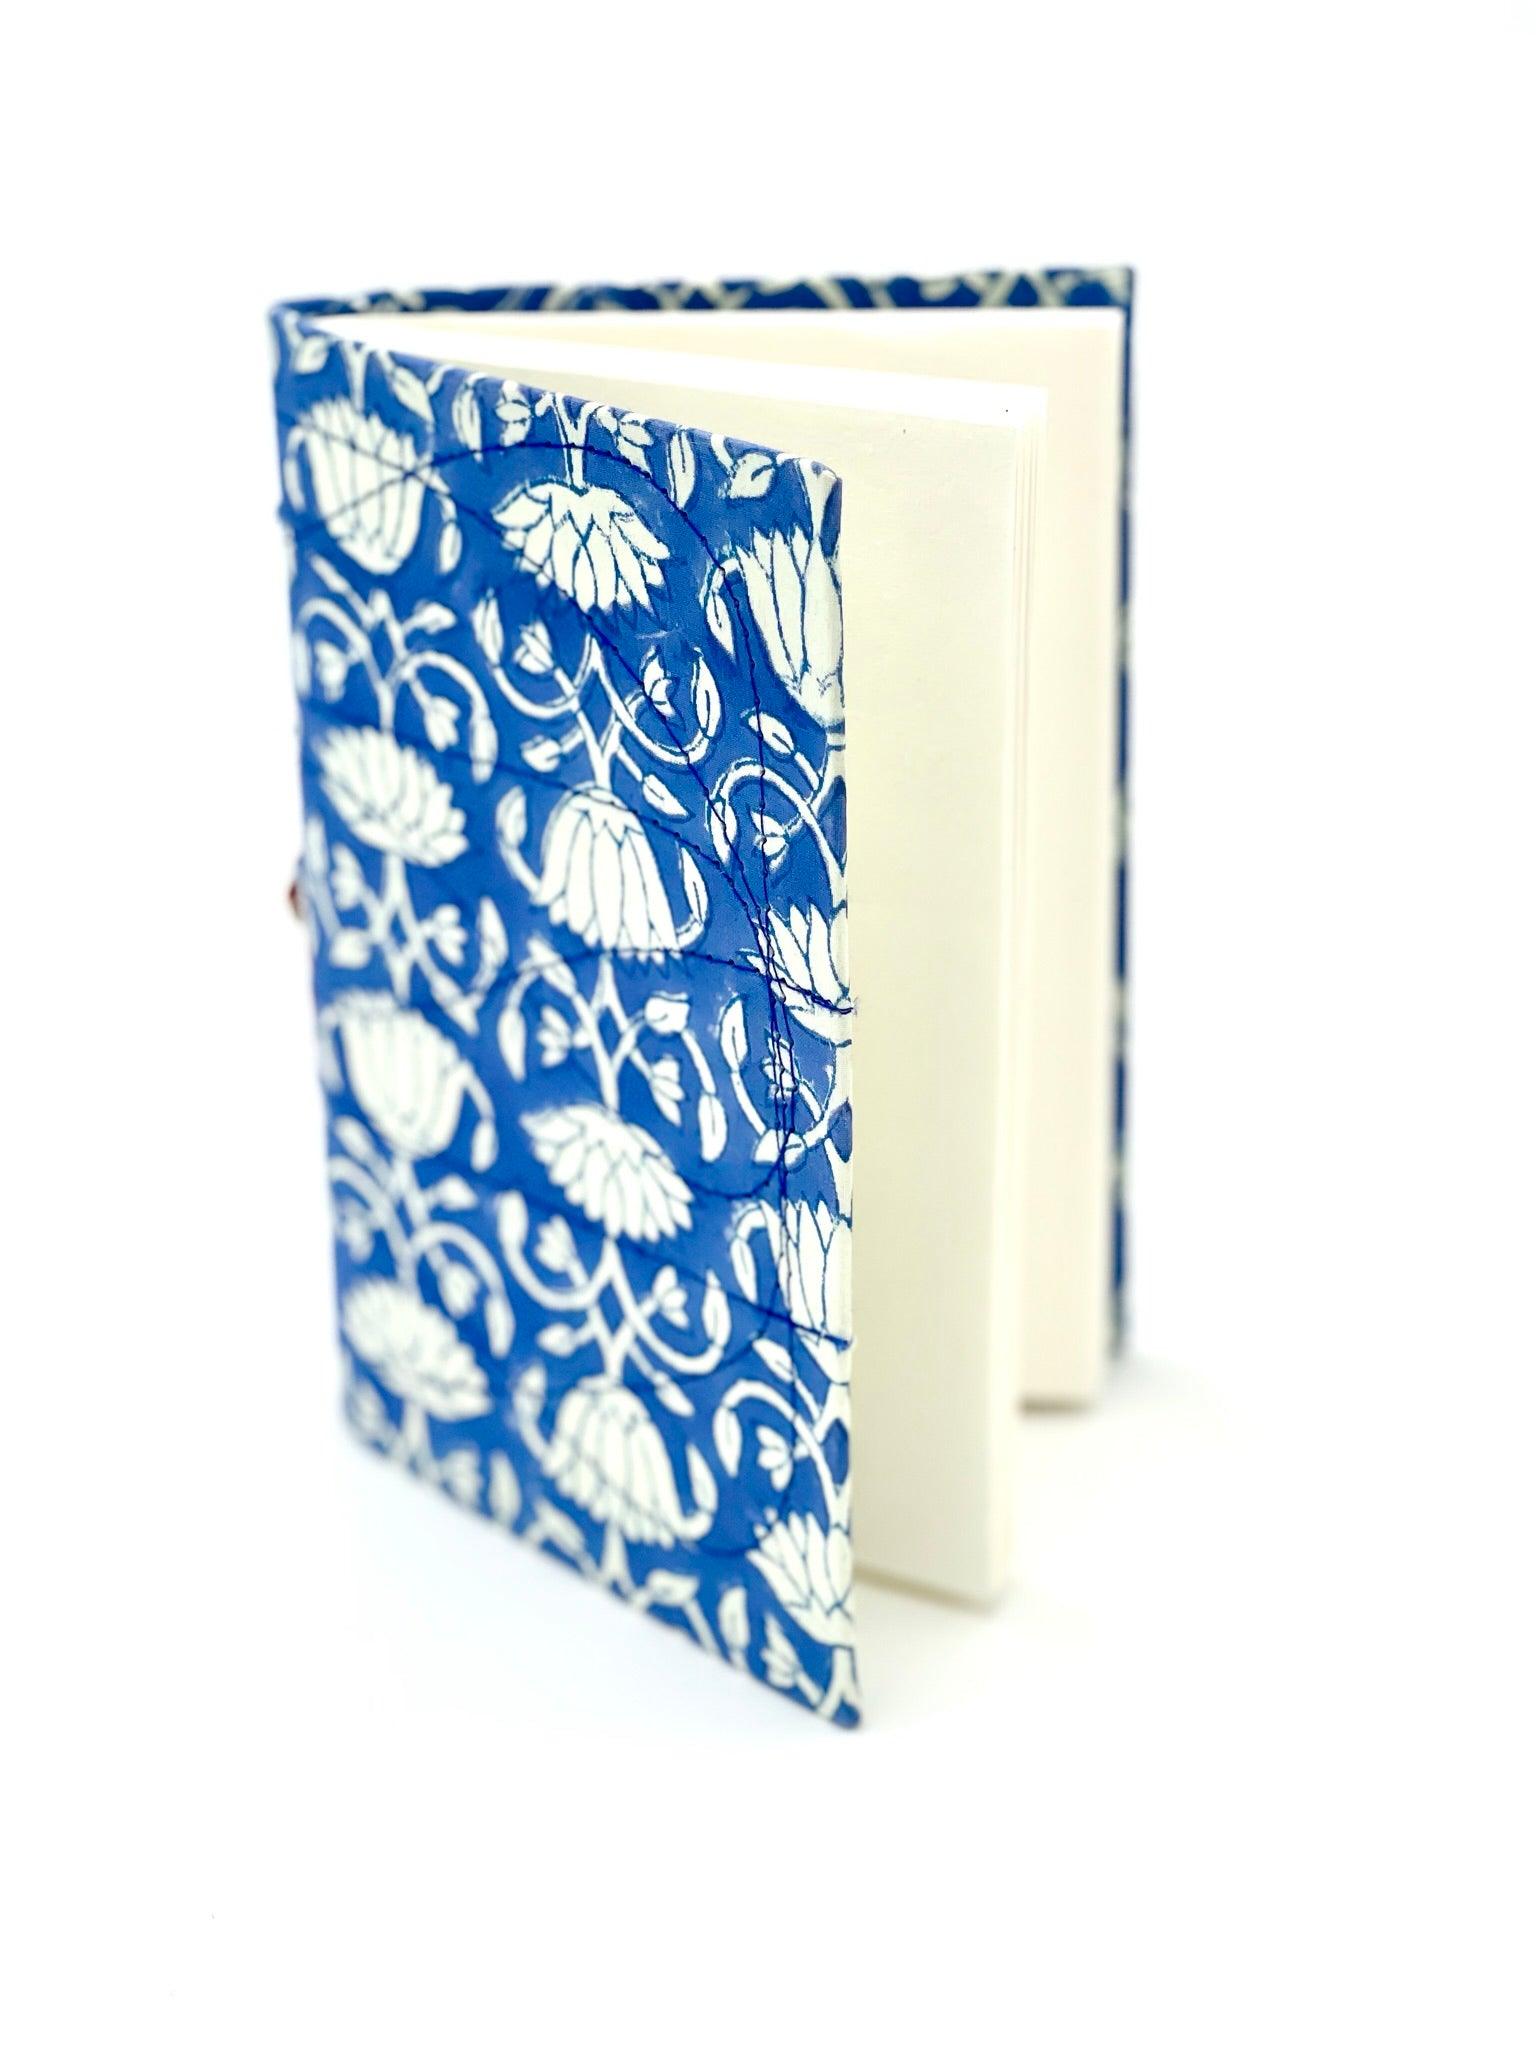 Block Print Journal/Notebook, Morocco Blue & White Lotus - Unlined, 100 Pages, Thick Paper, Hard Cover - Transcend